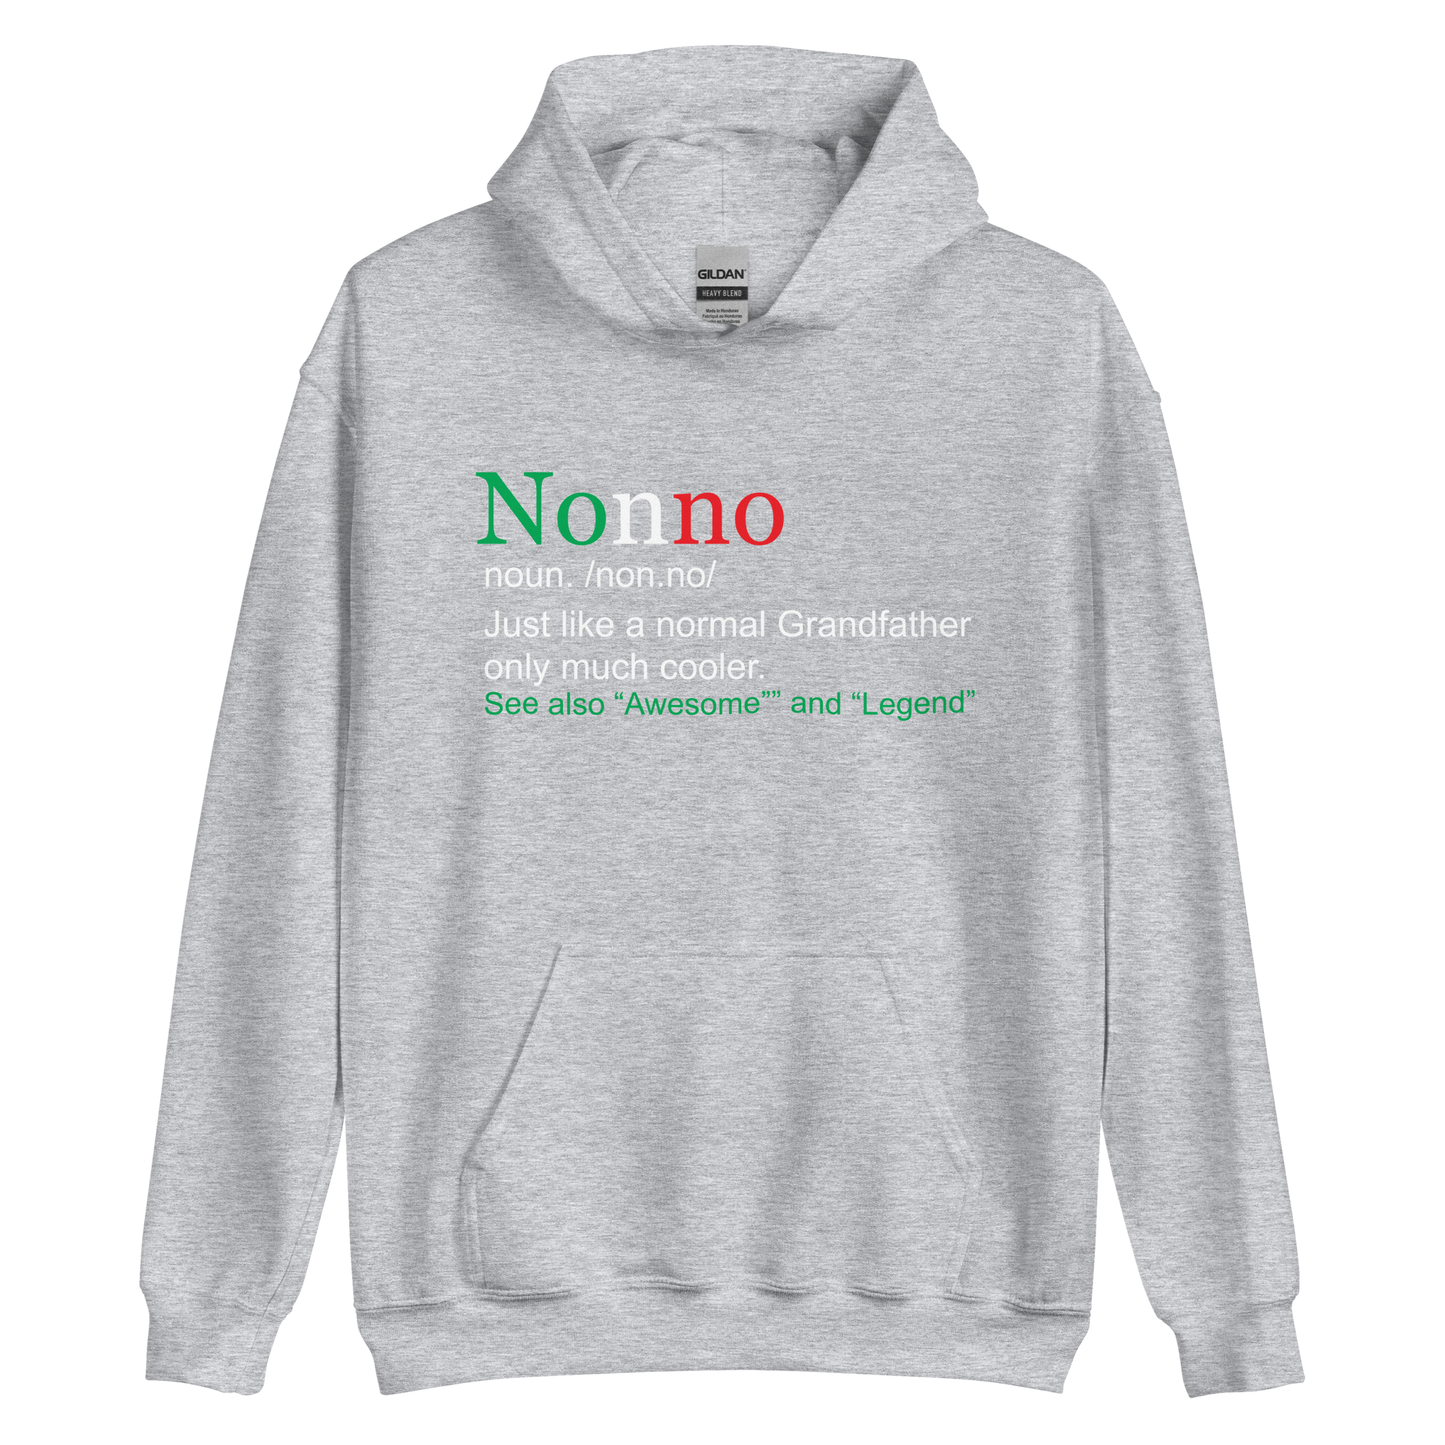 What Defines a Nonno: Cool Grandfather Hoodie: Celebrating Love, Wisdom, and Style Defined- Vintage Flag Hoodie for Italians